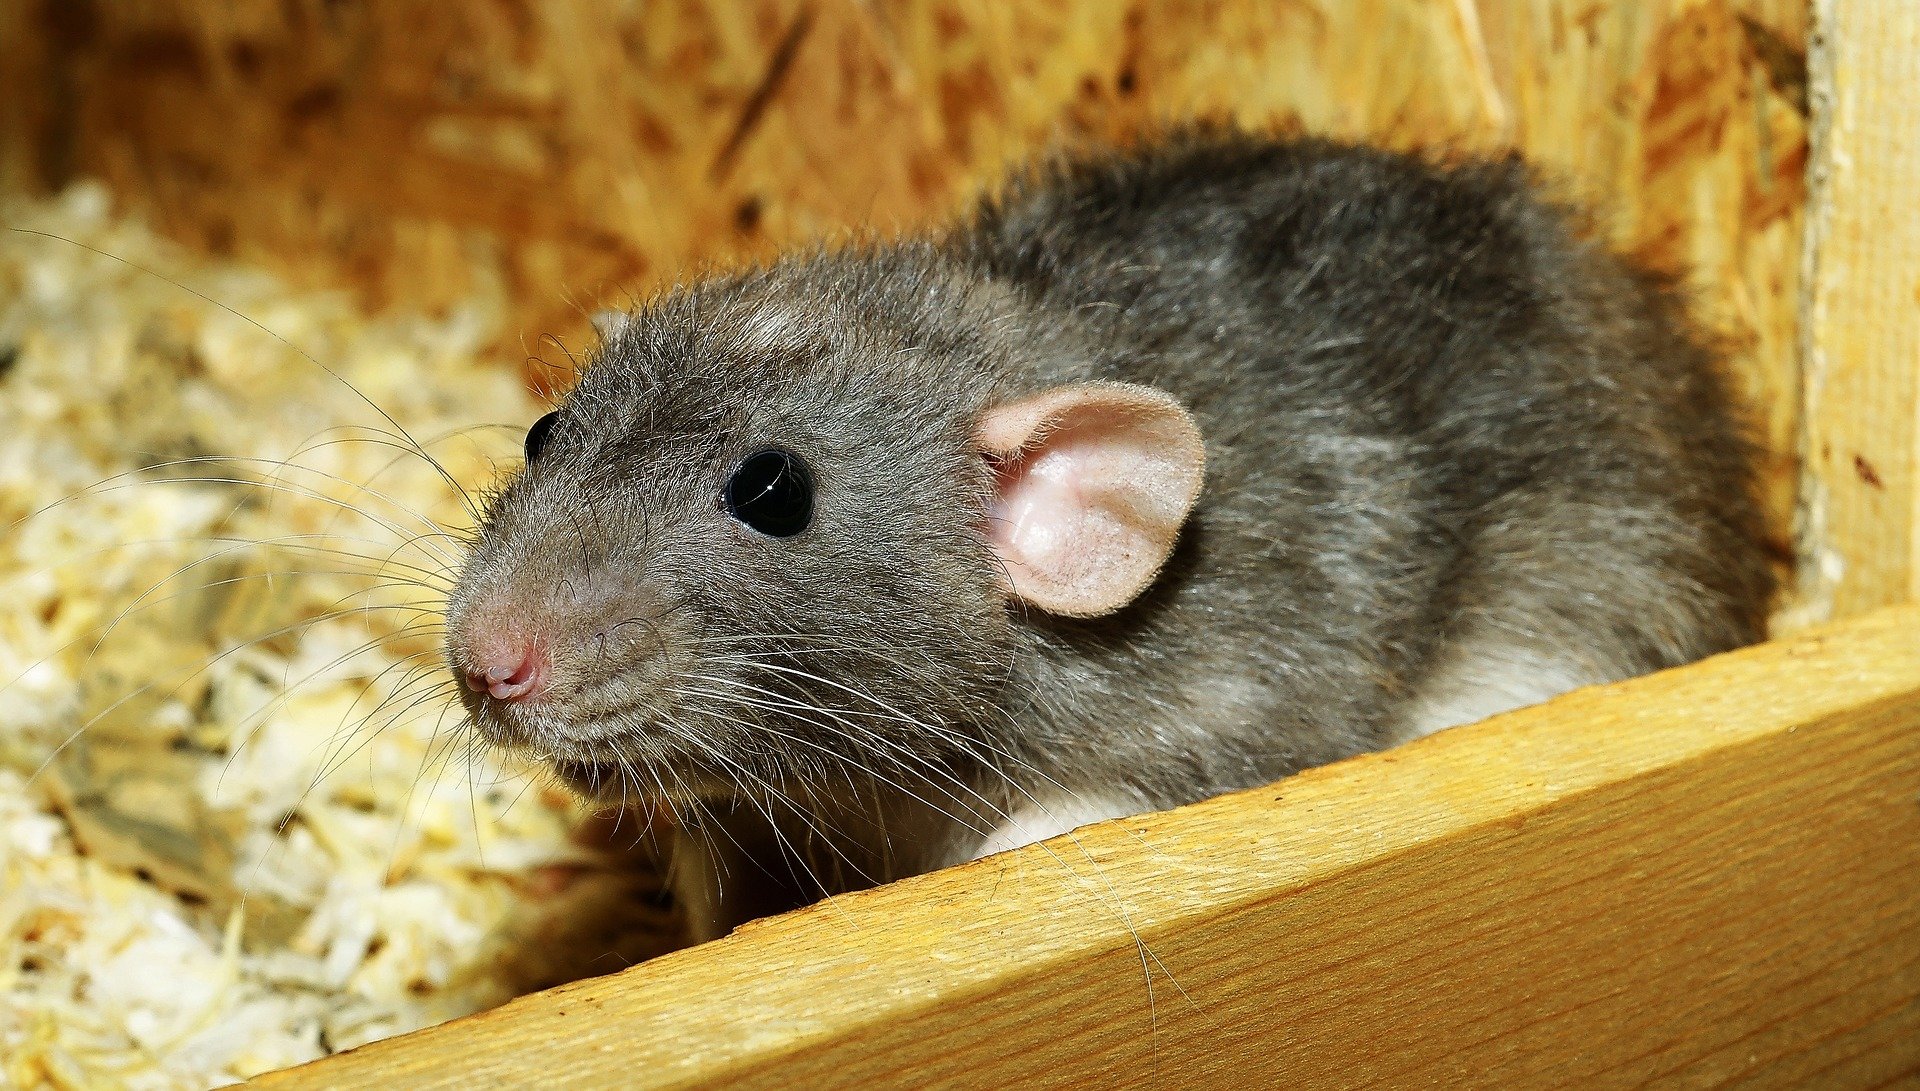 Rats have an imagination, new research finds